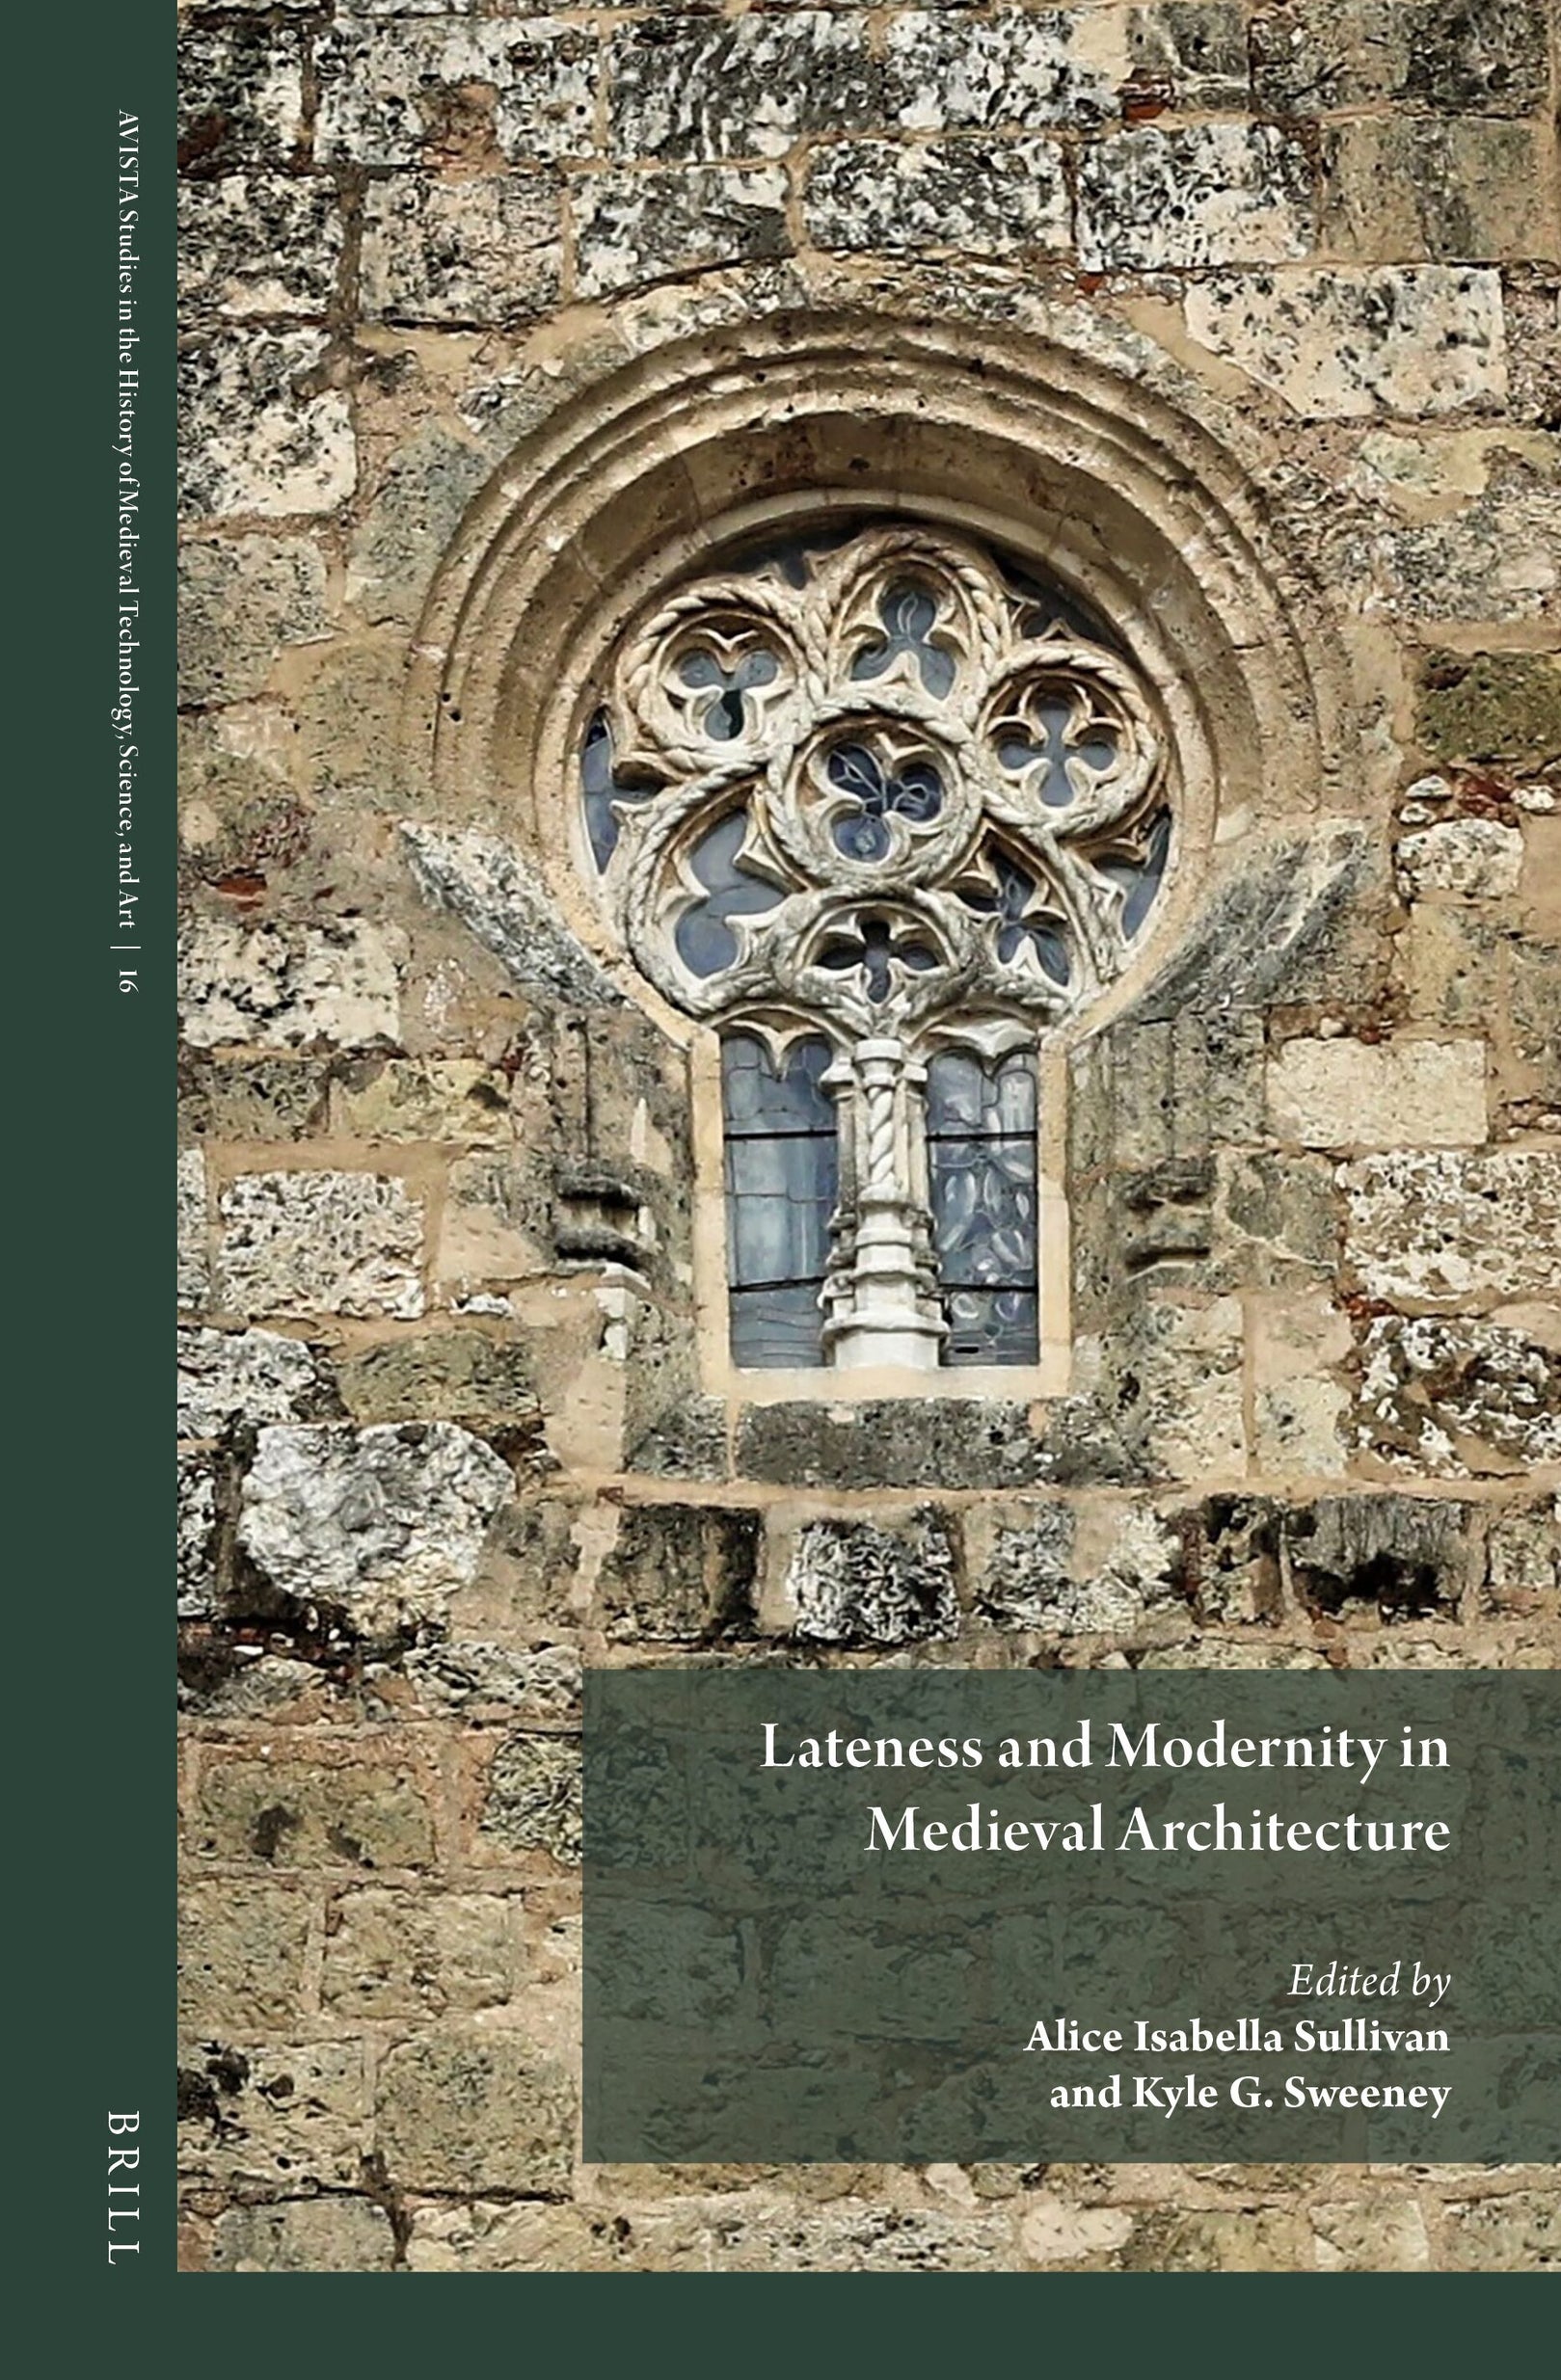 "Lateness and Modernity in Medieval Architecture"